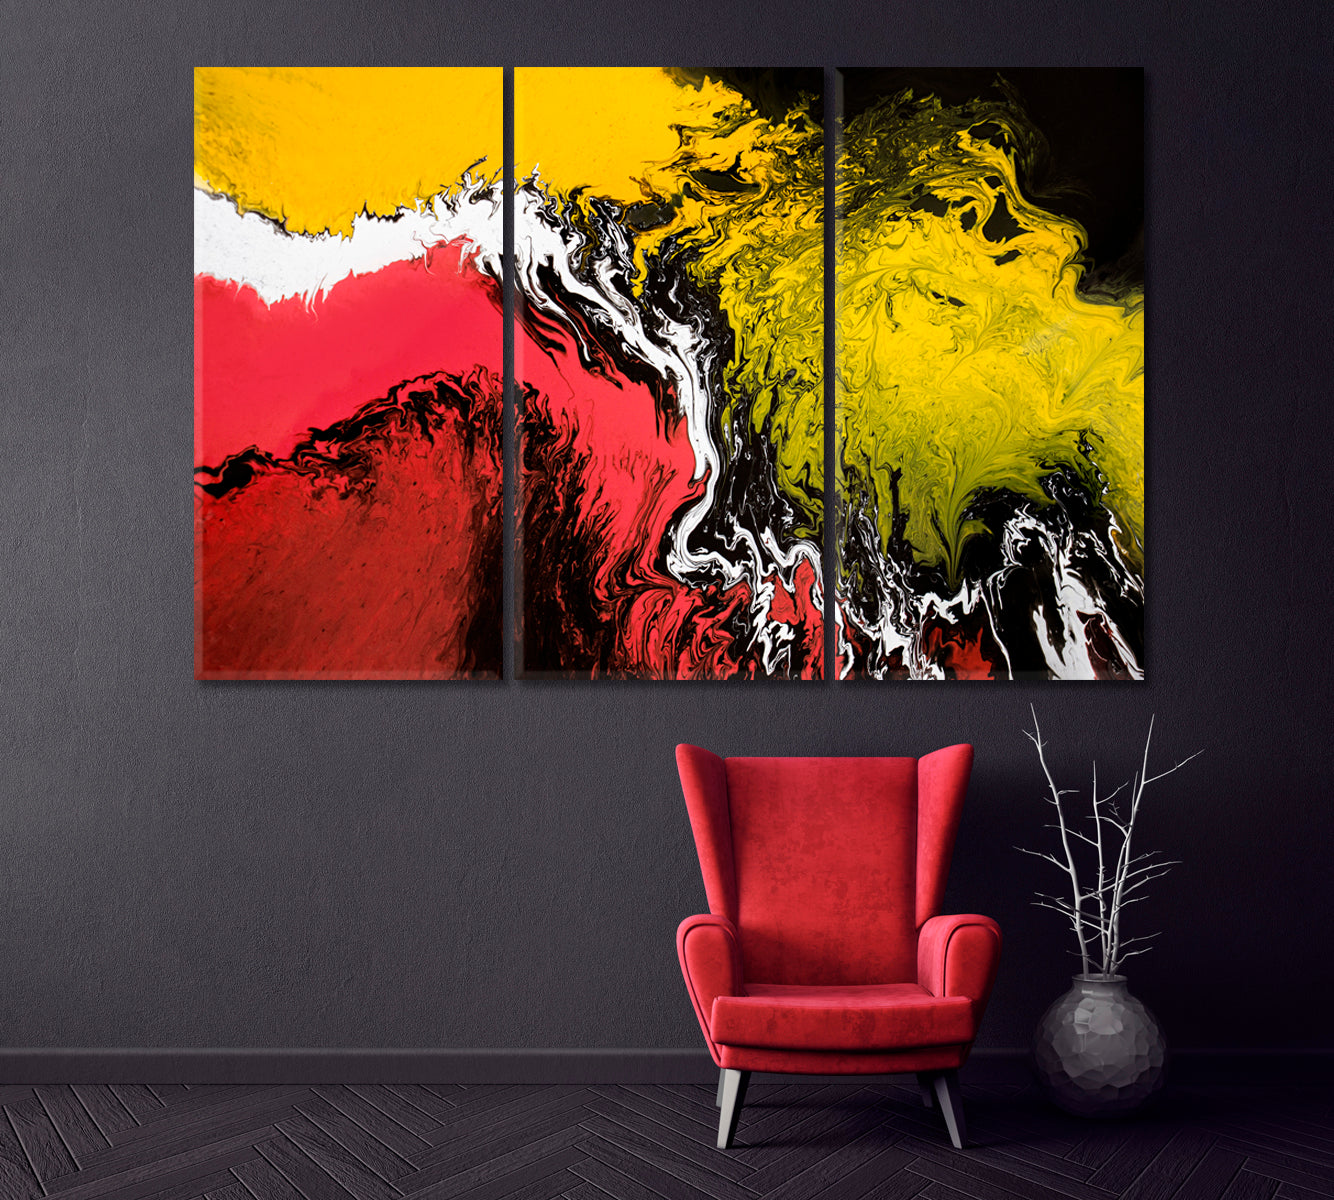 Abstract Fluid Acrylic Painting Canvas Print ArtLexy 3 Panels 36"x24" inches 